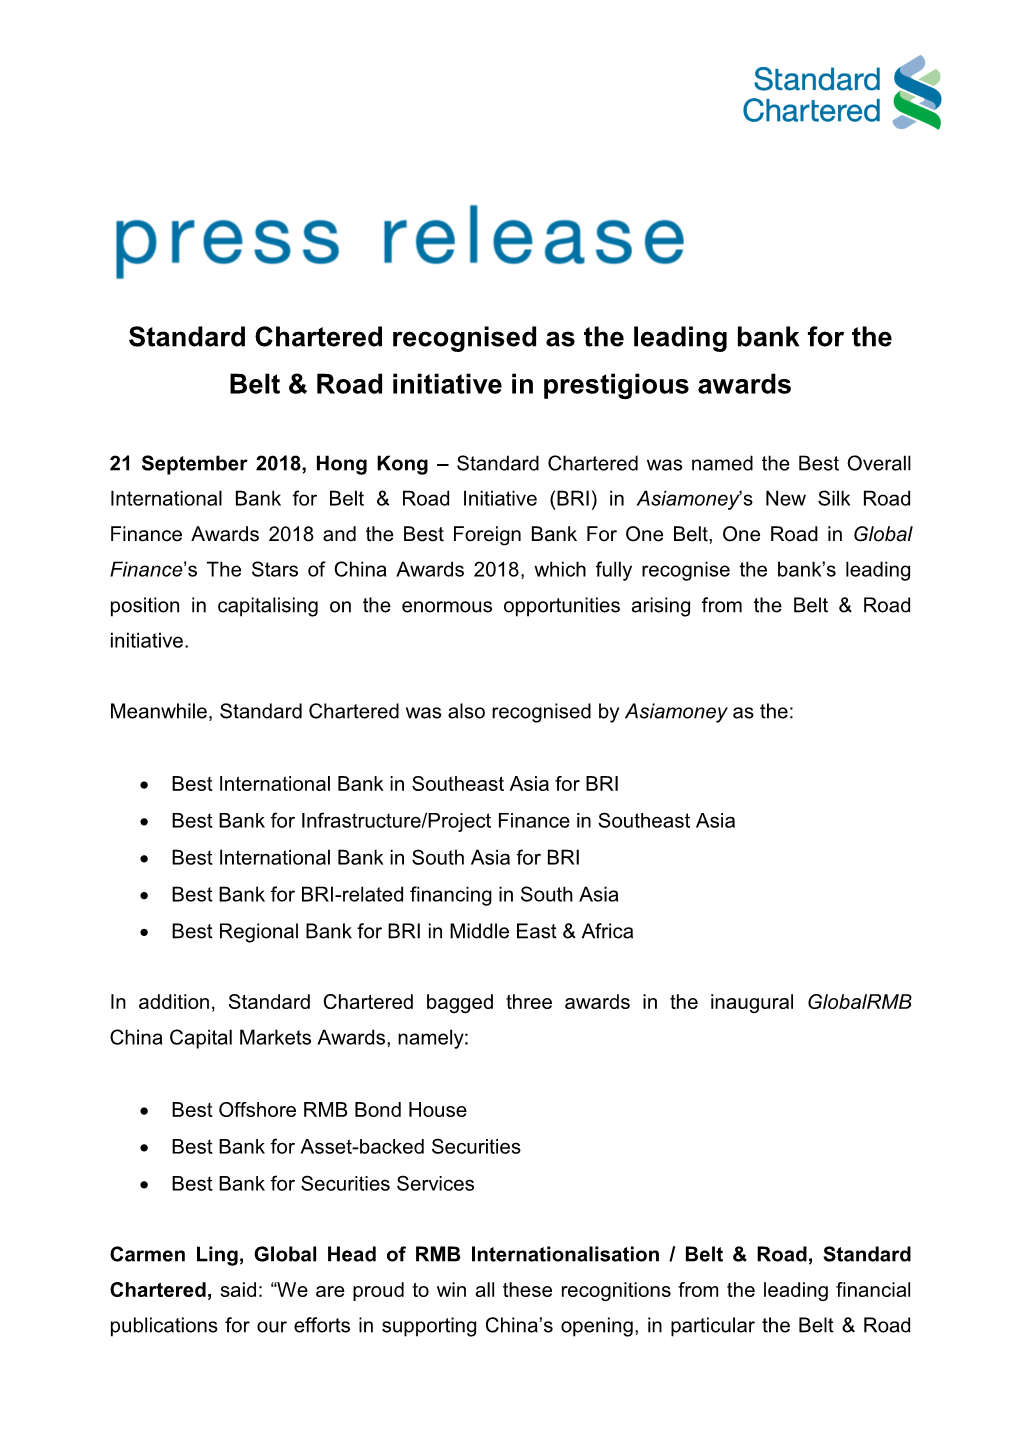 Standard Chartered Recognised As the Leading Bank for the Belt & Road